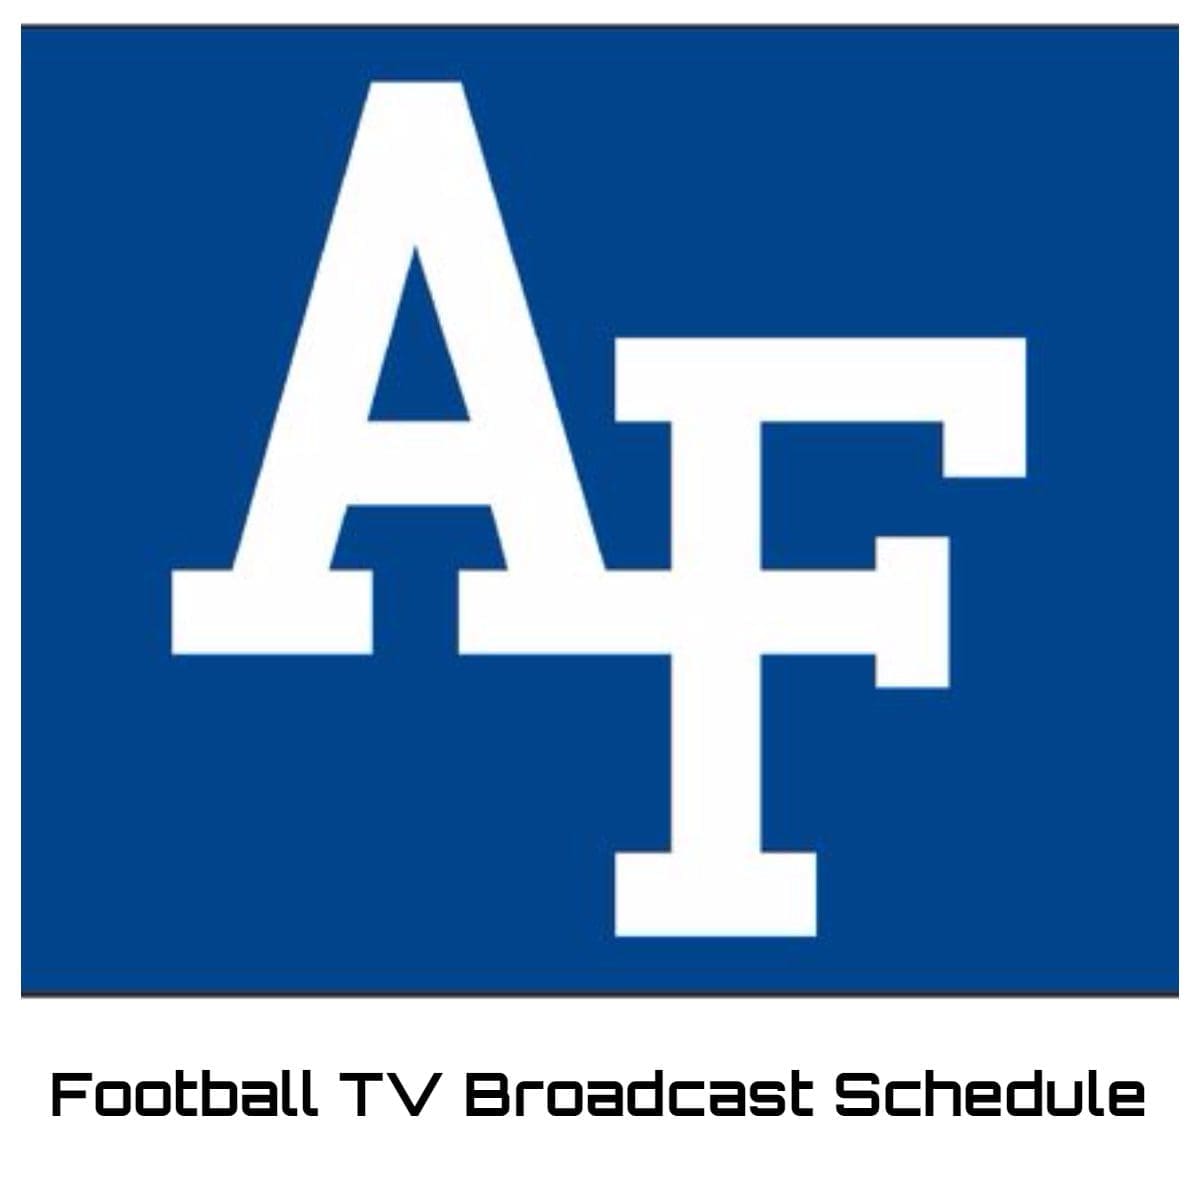 Air Force Falcons Football TV Broadcast Schedule